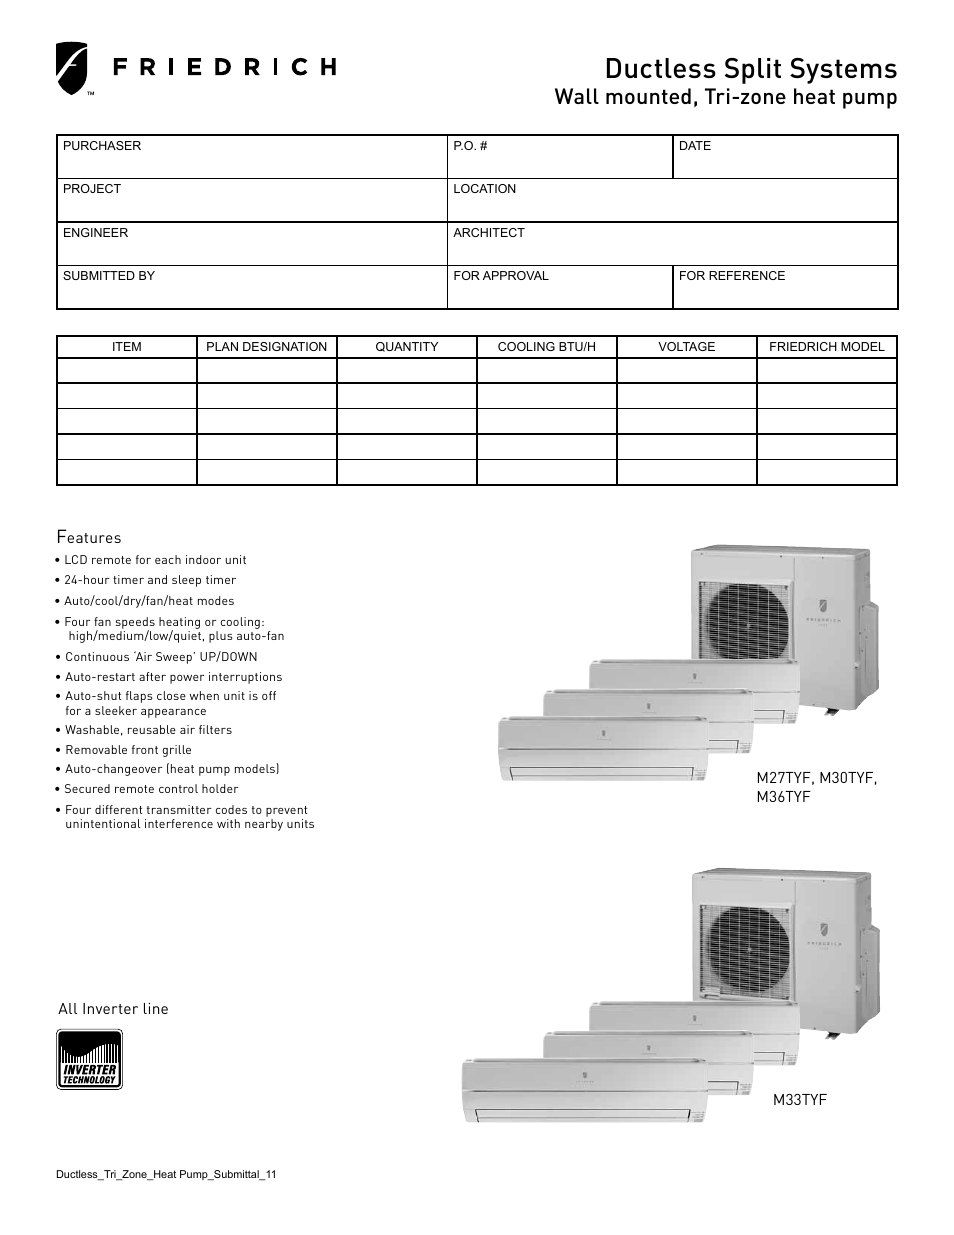 DUCTLESS SPLIT SYSTEMS M27TYF